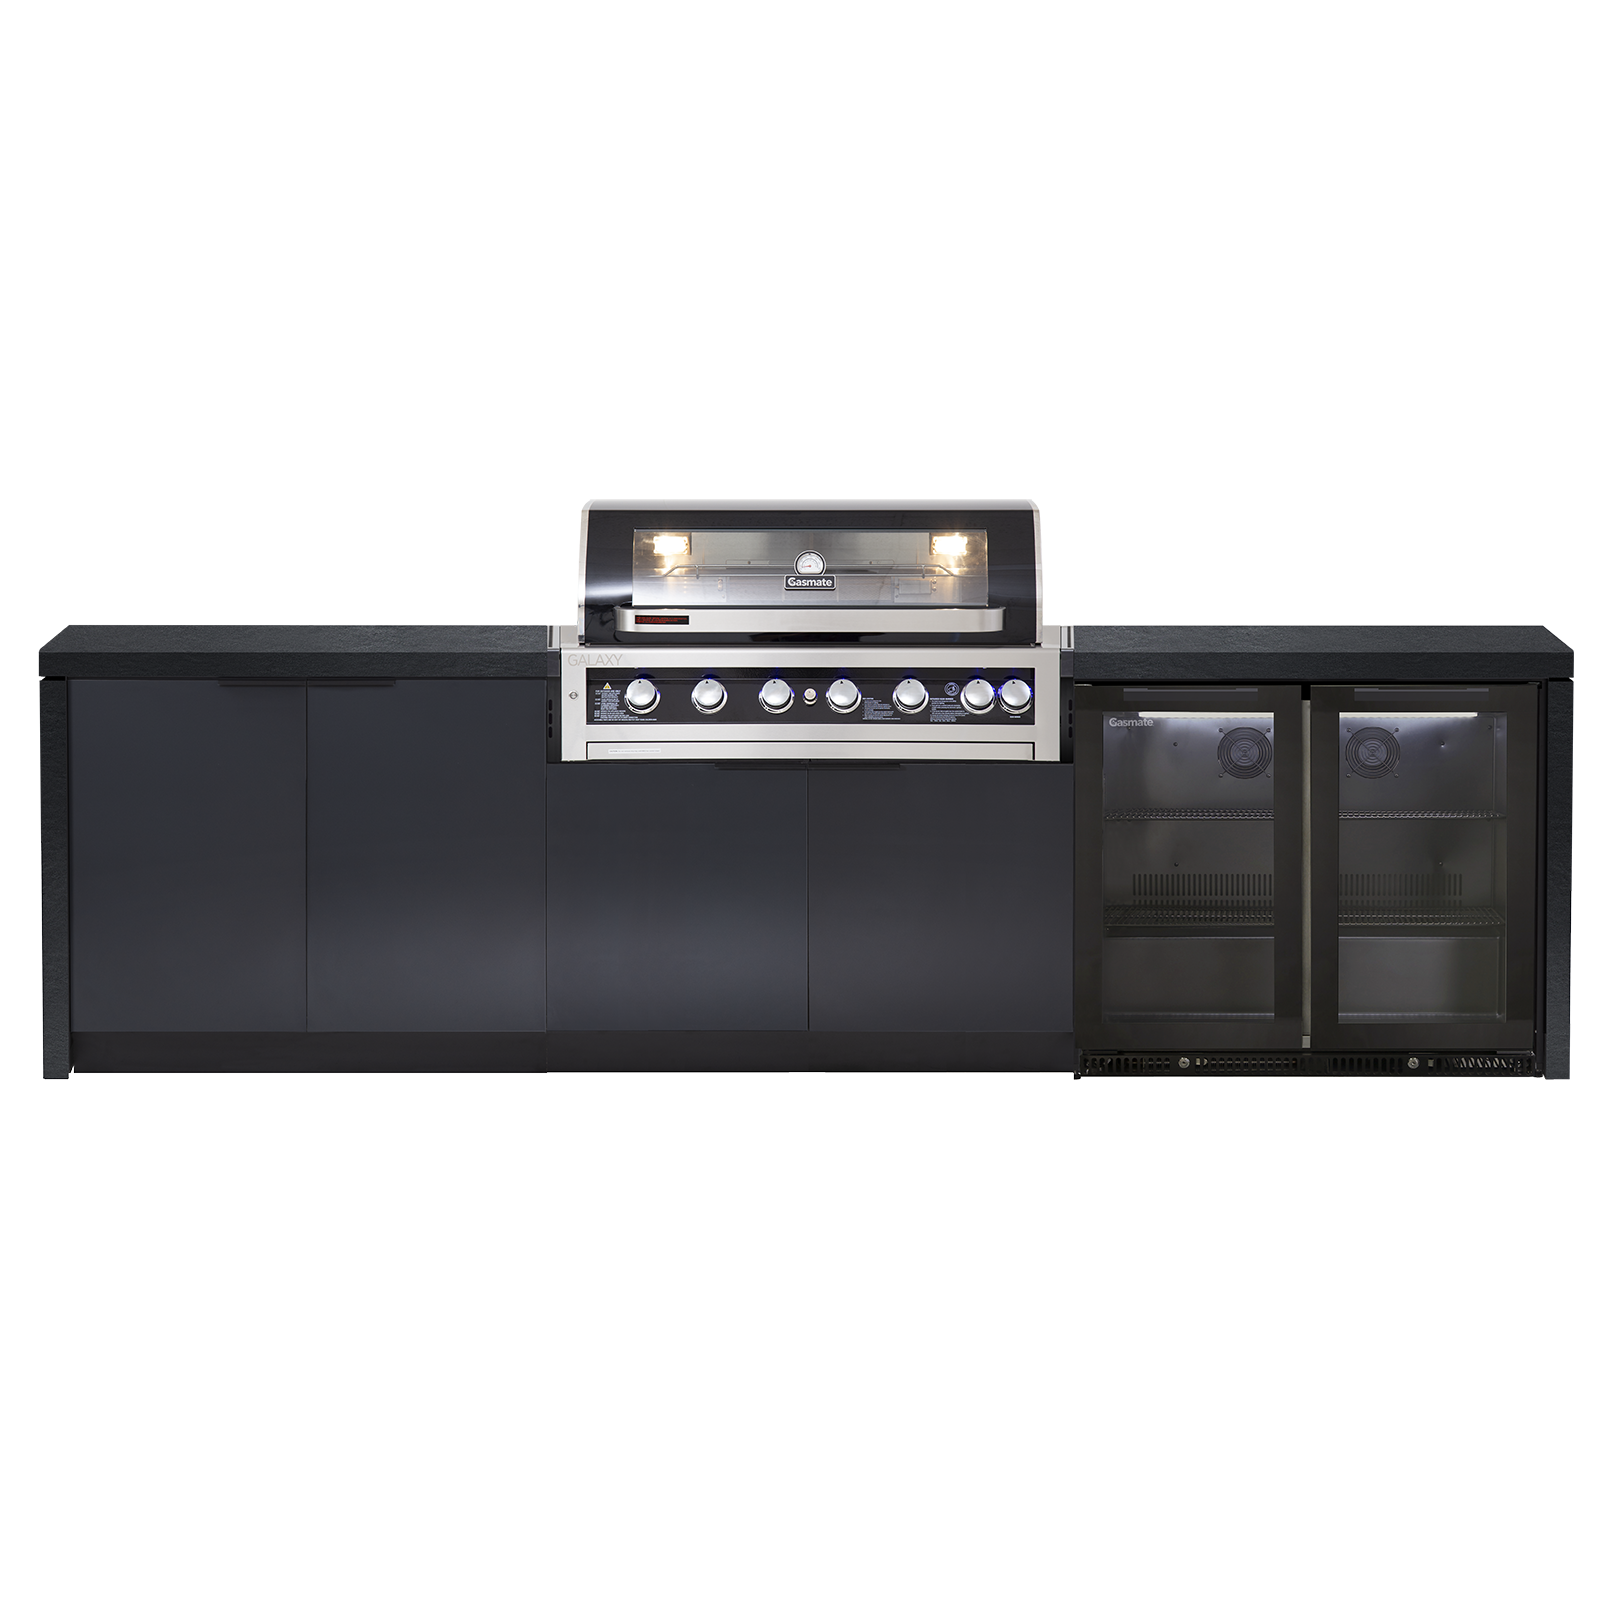 Cabinex Galaxy Black (Classic) 6 Burner Outdoor Kitchen Package with Porcelain Benchtop